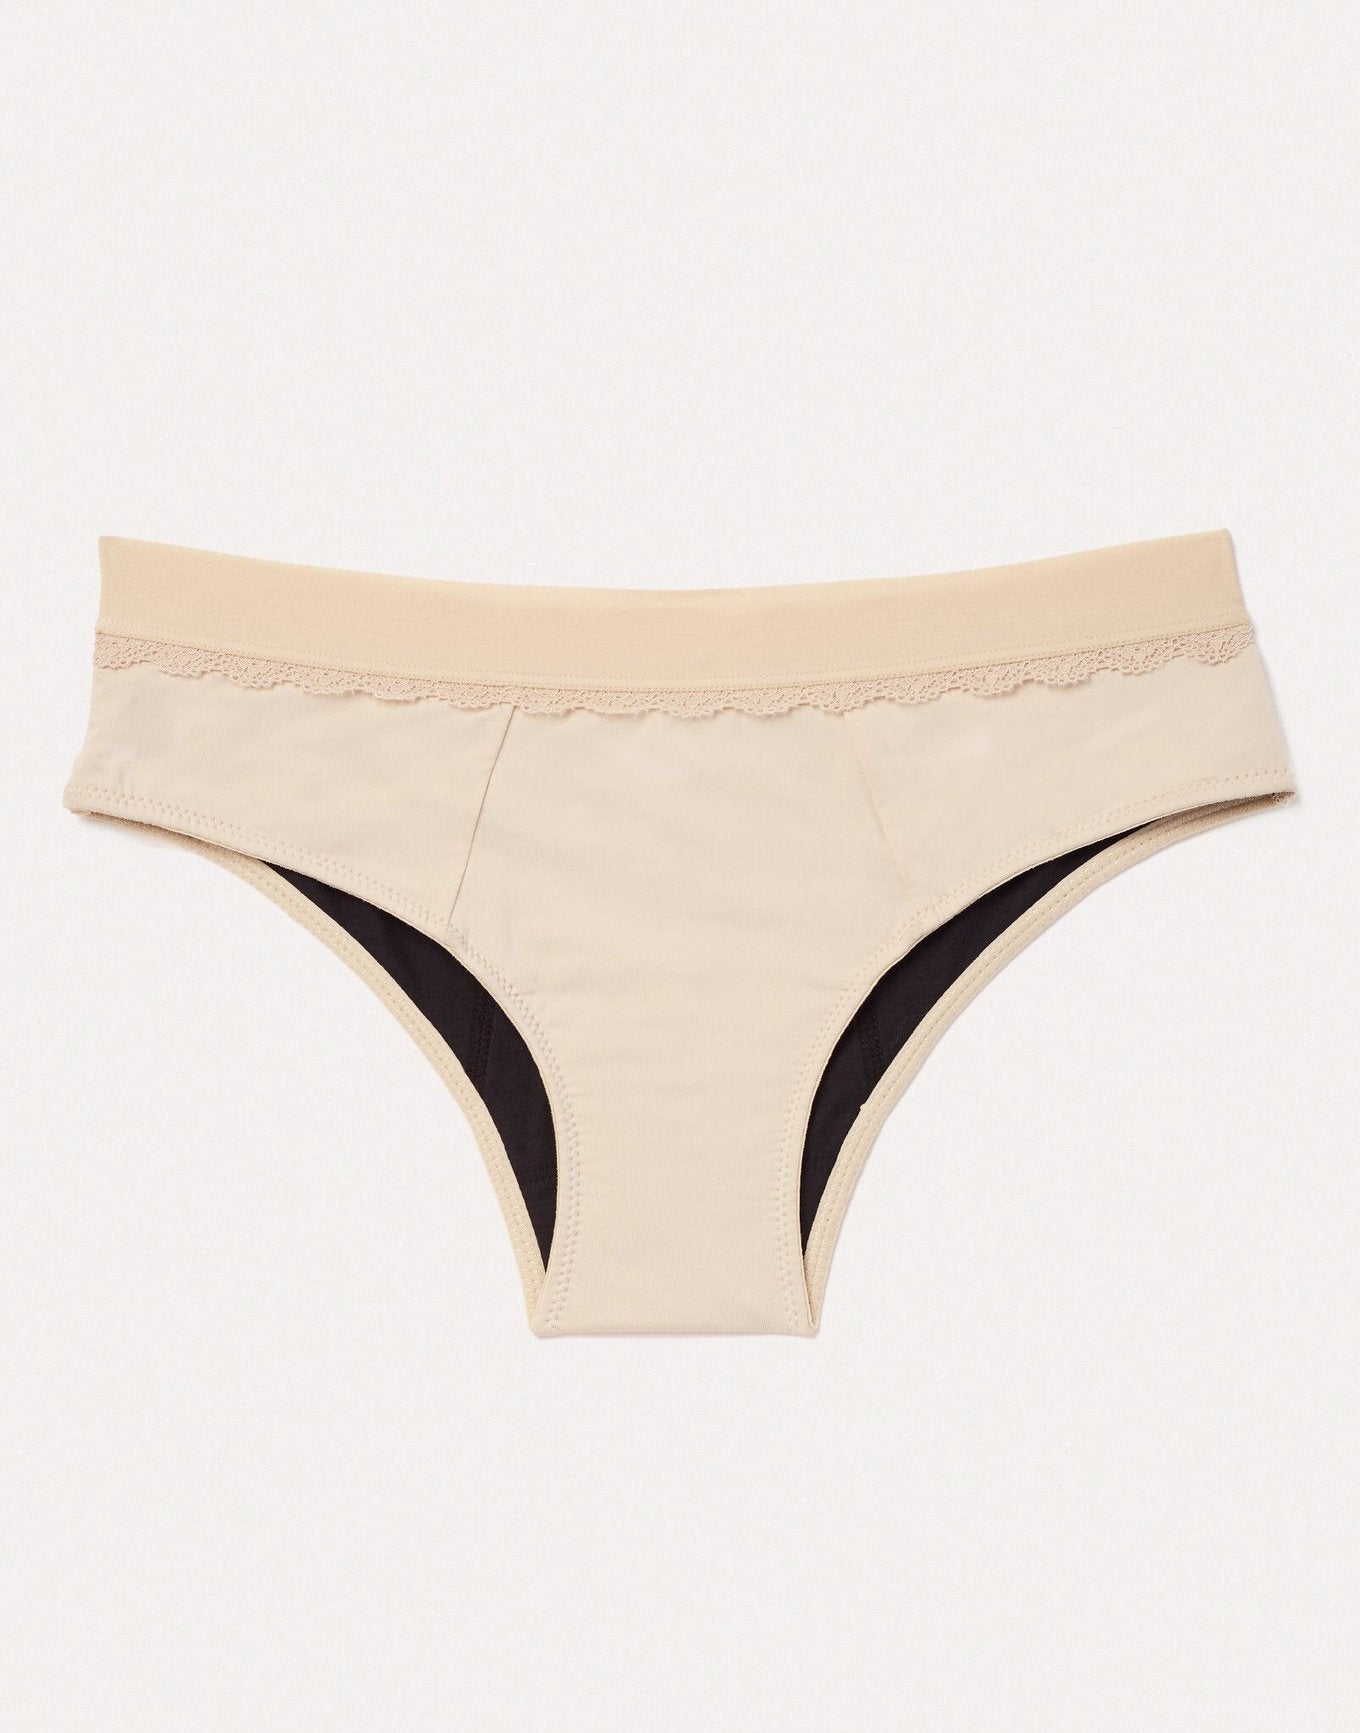 Joyja Cindy period-proof panty in color Strut The Street and shape cheeky